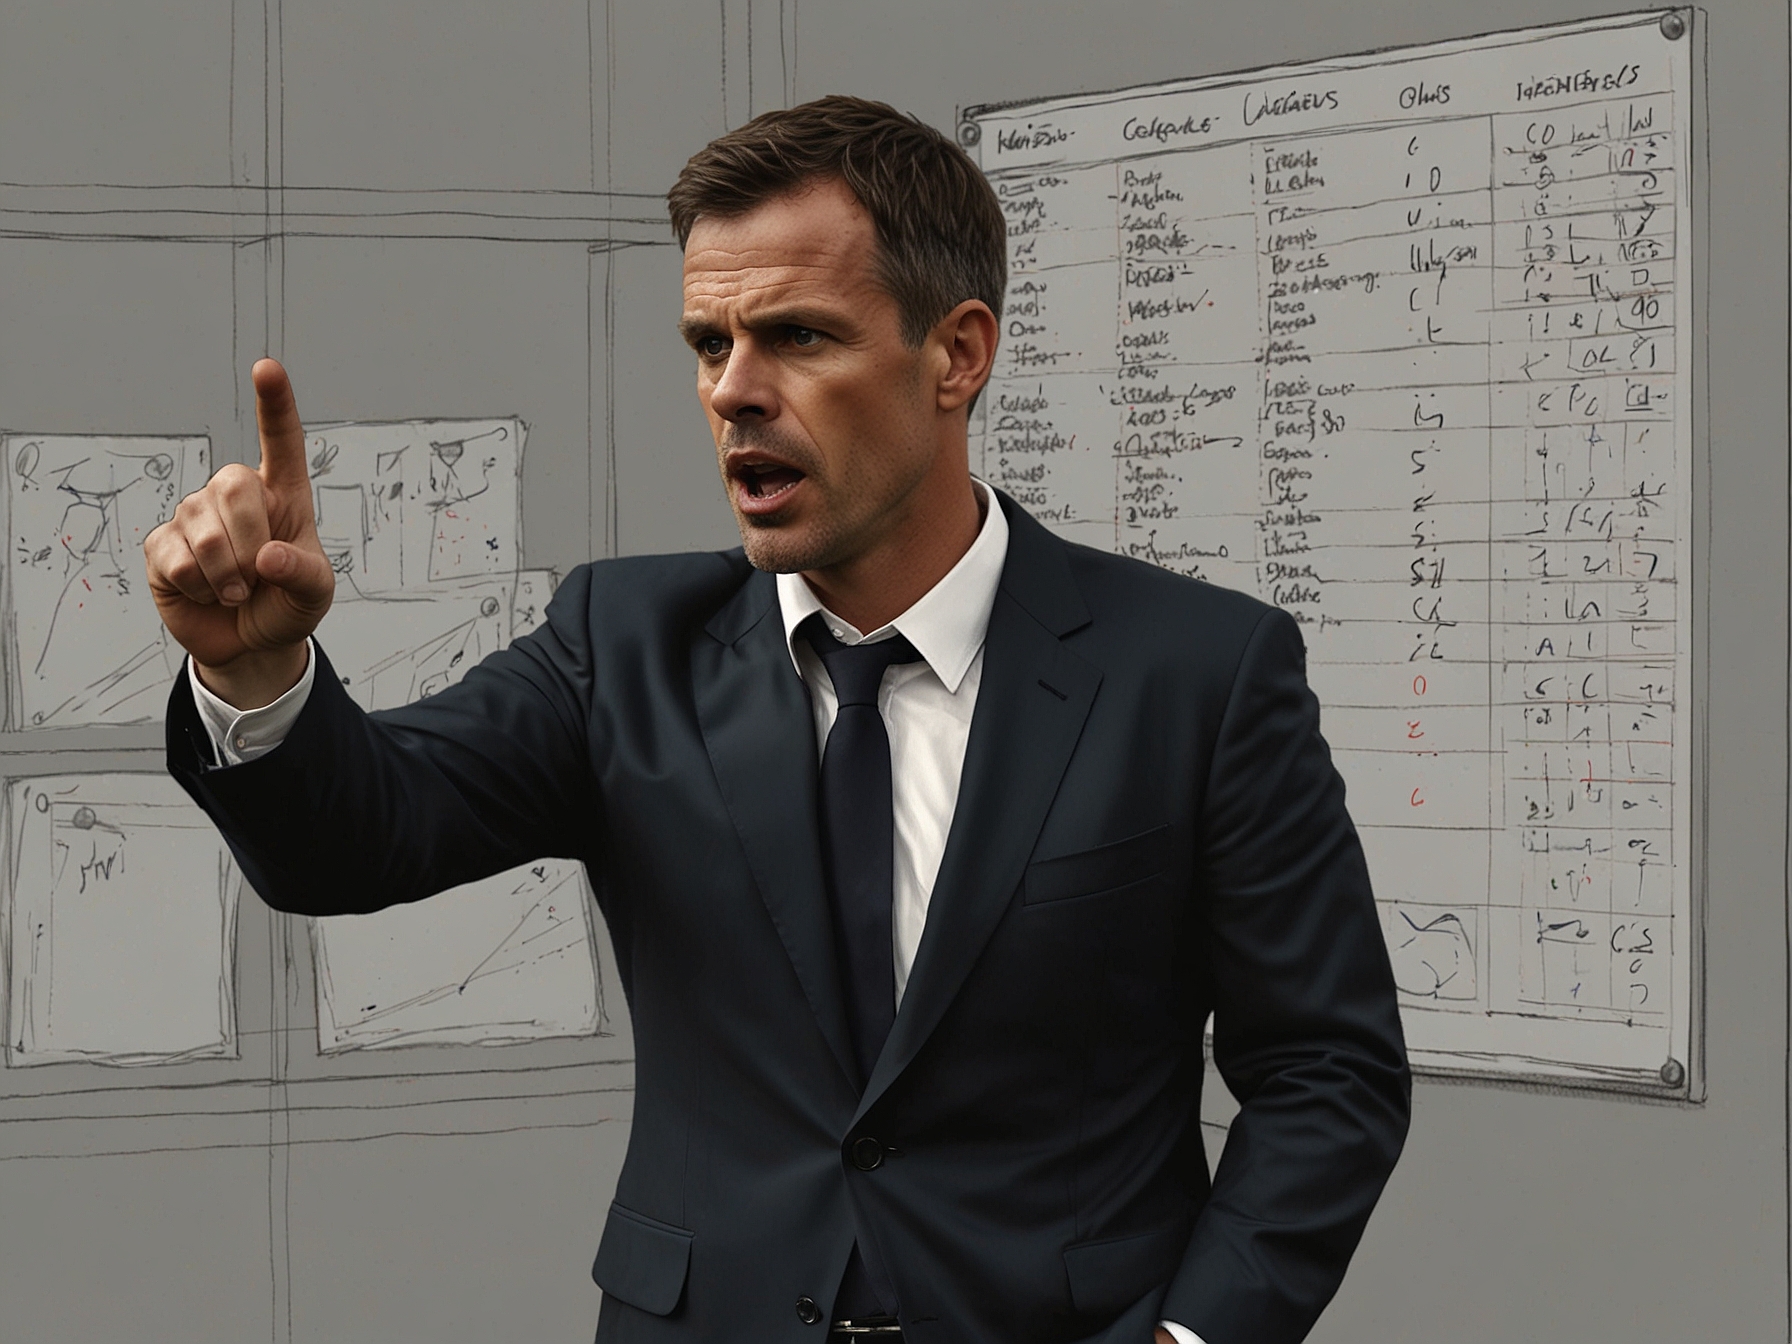 Jamie Carragher passionately analyzing England's tactical setup, pointing to a tactical board indicating proposed changes in player positions and formations.